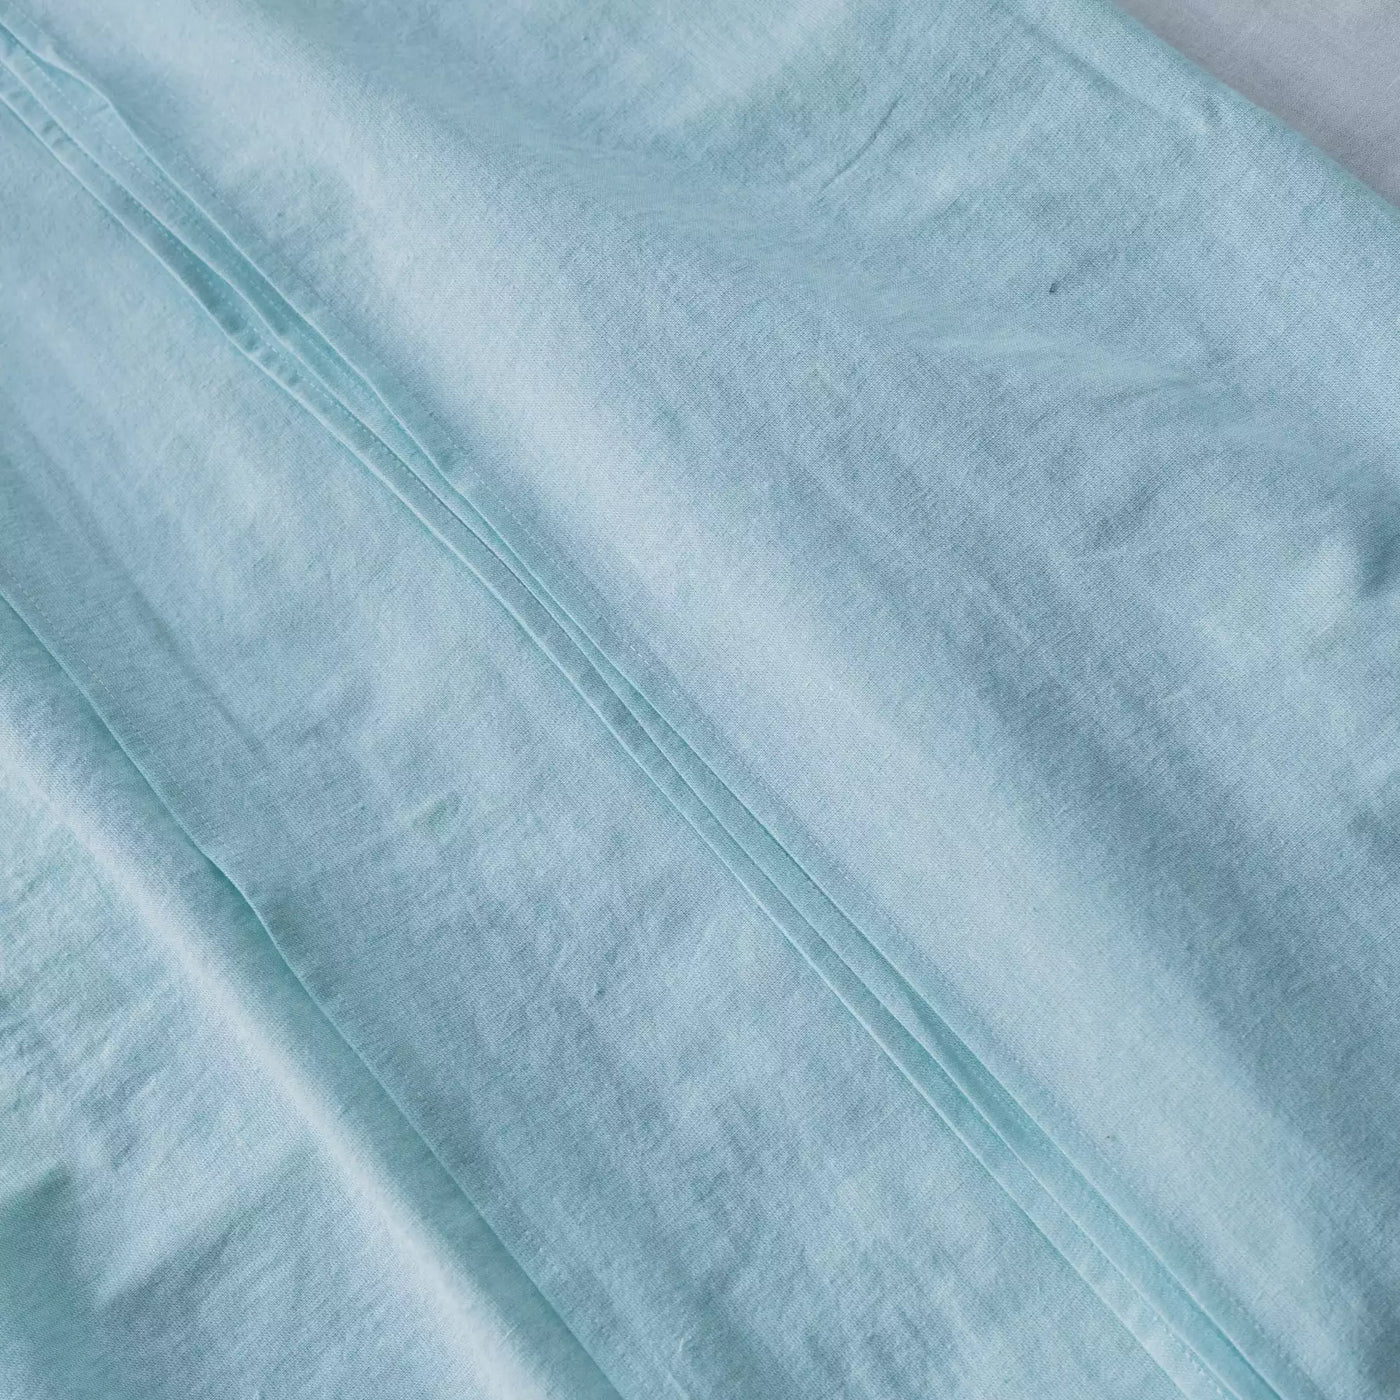 Linen & Cotton Bedding set with Flat sheet 190x270 in Turquoise Melange